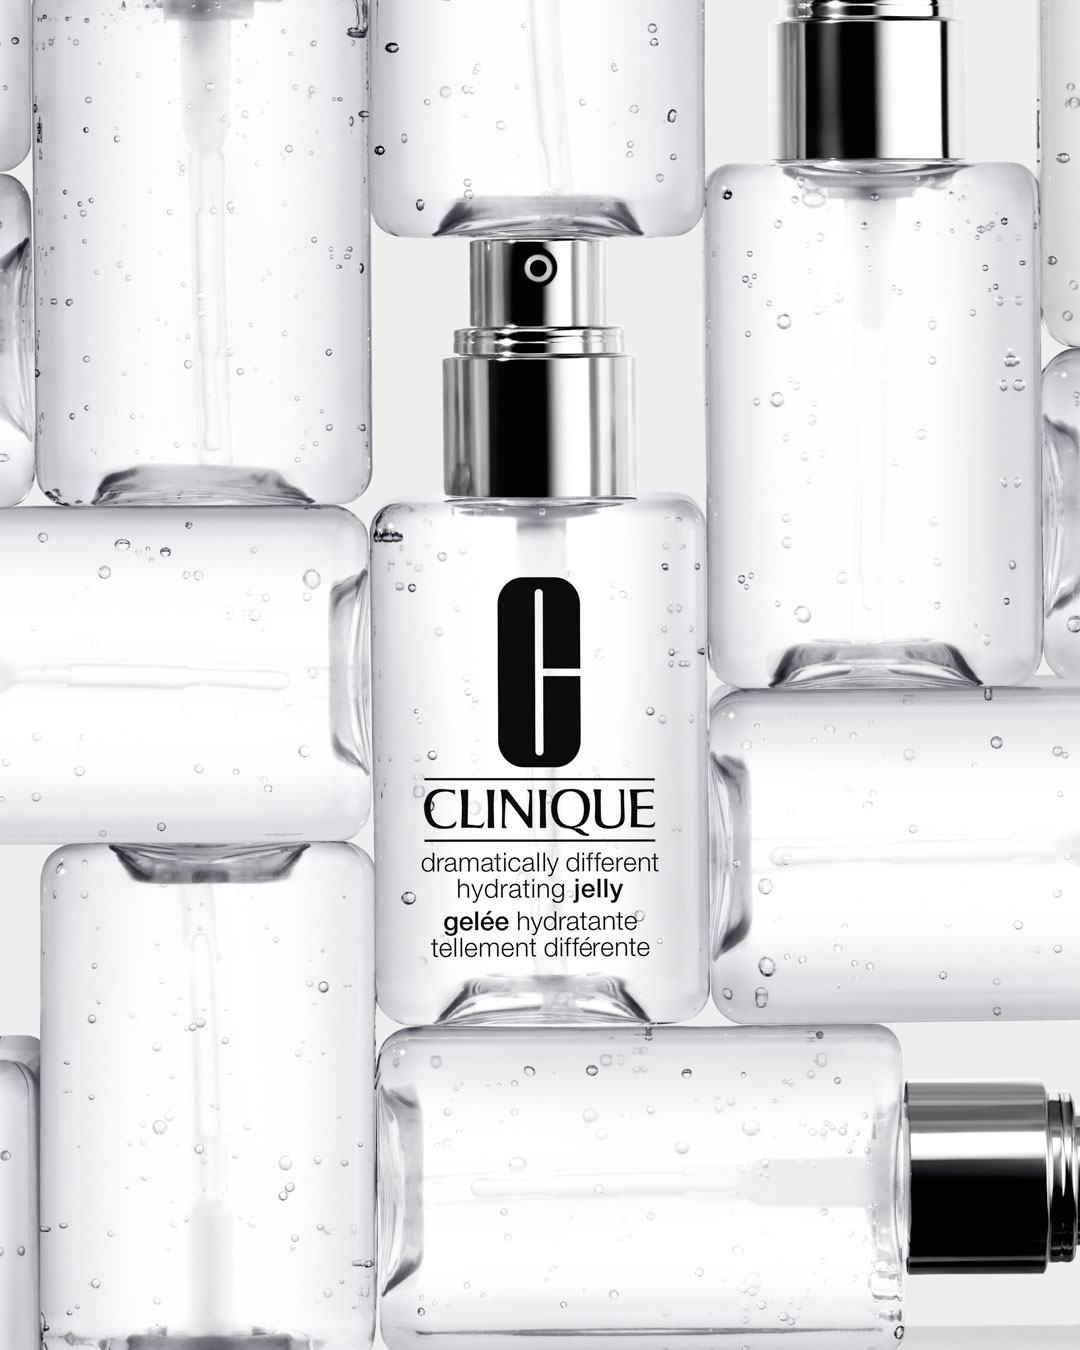 Clinique Dramatically Different Hydrating Jelly bundle